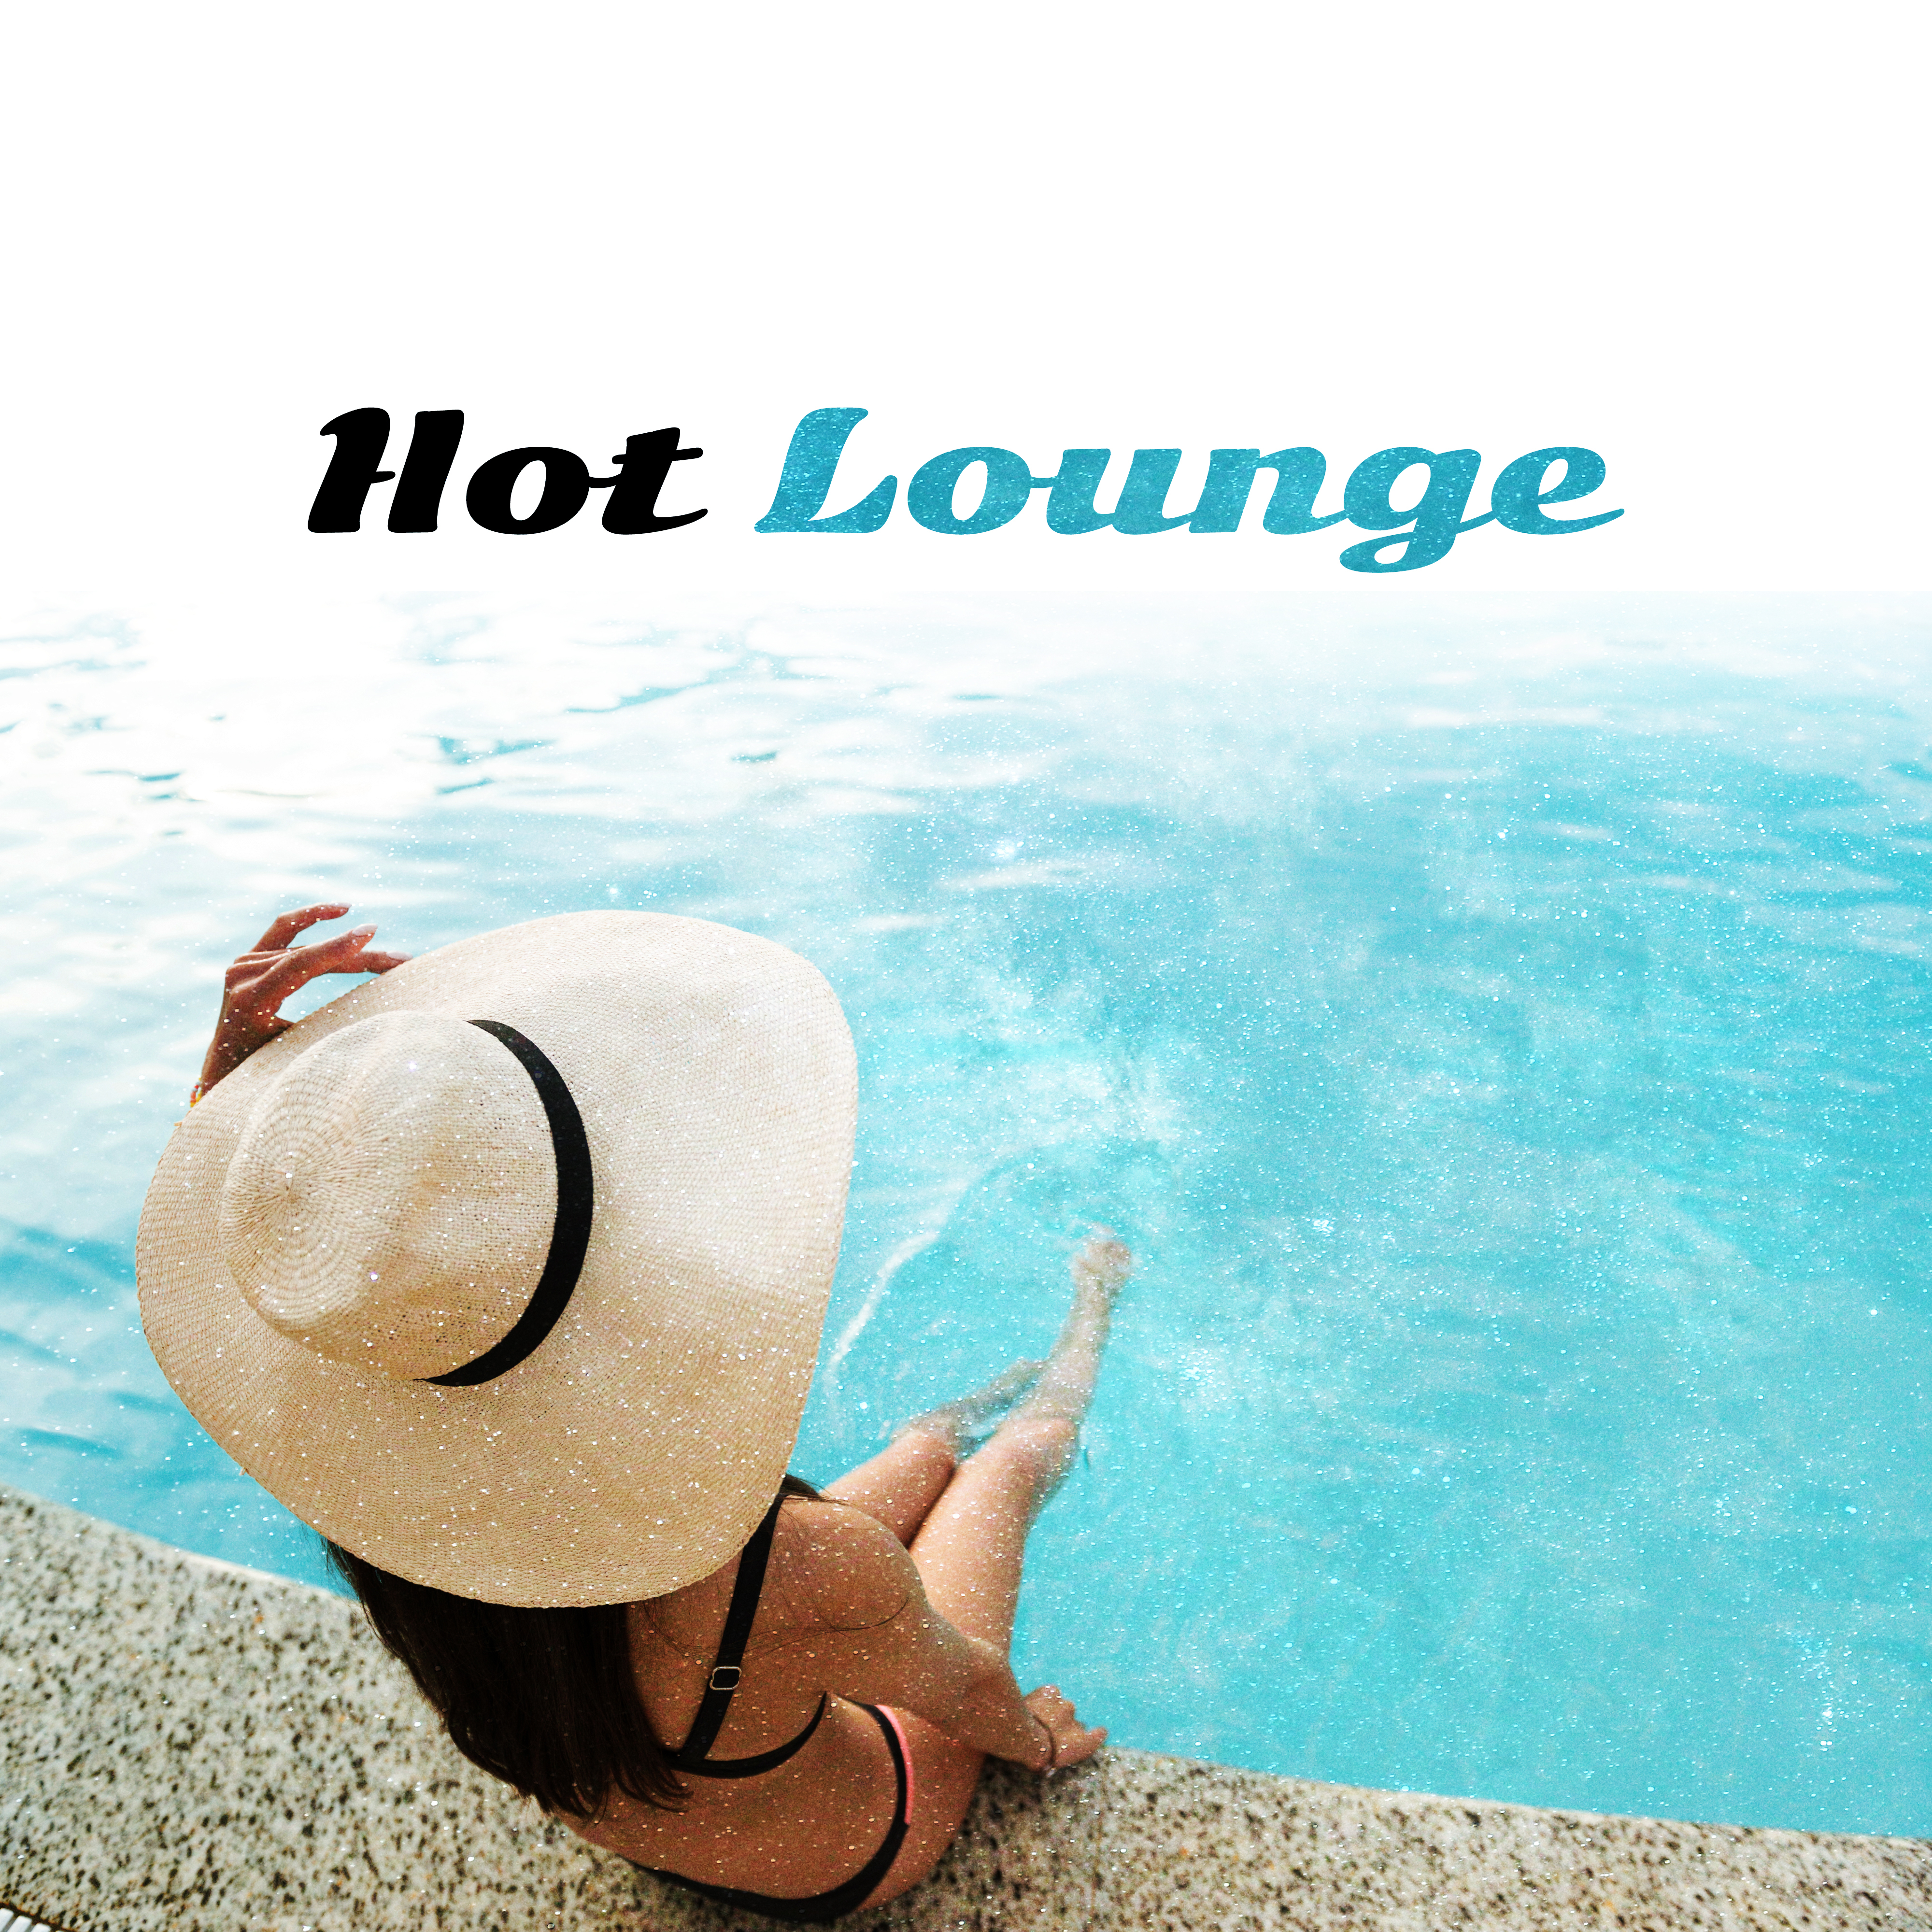 Hot Lounge – Chill Out 2017, Deep Chill Out, Relax, Summer Beats, Electronic Music